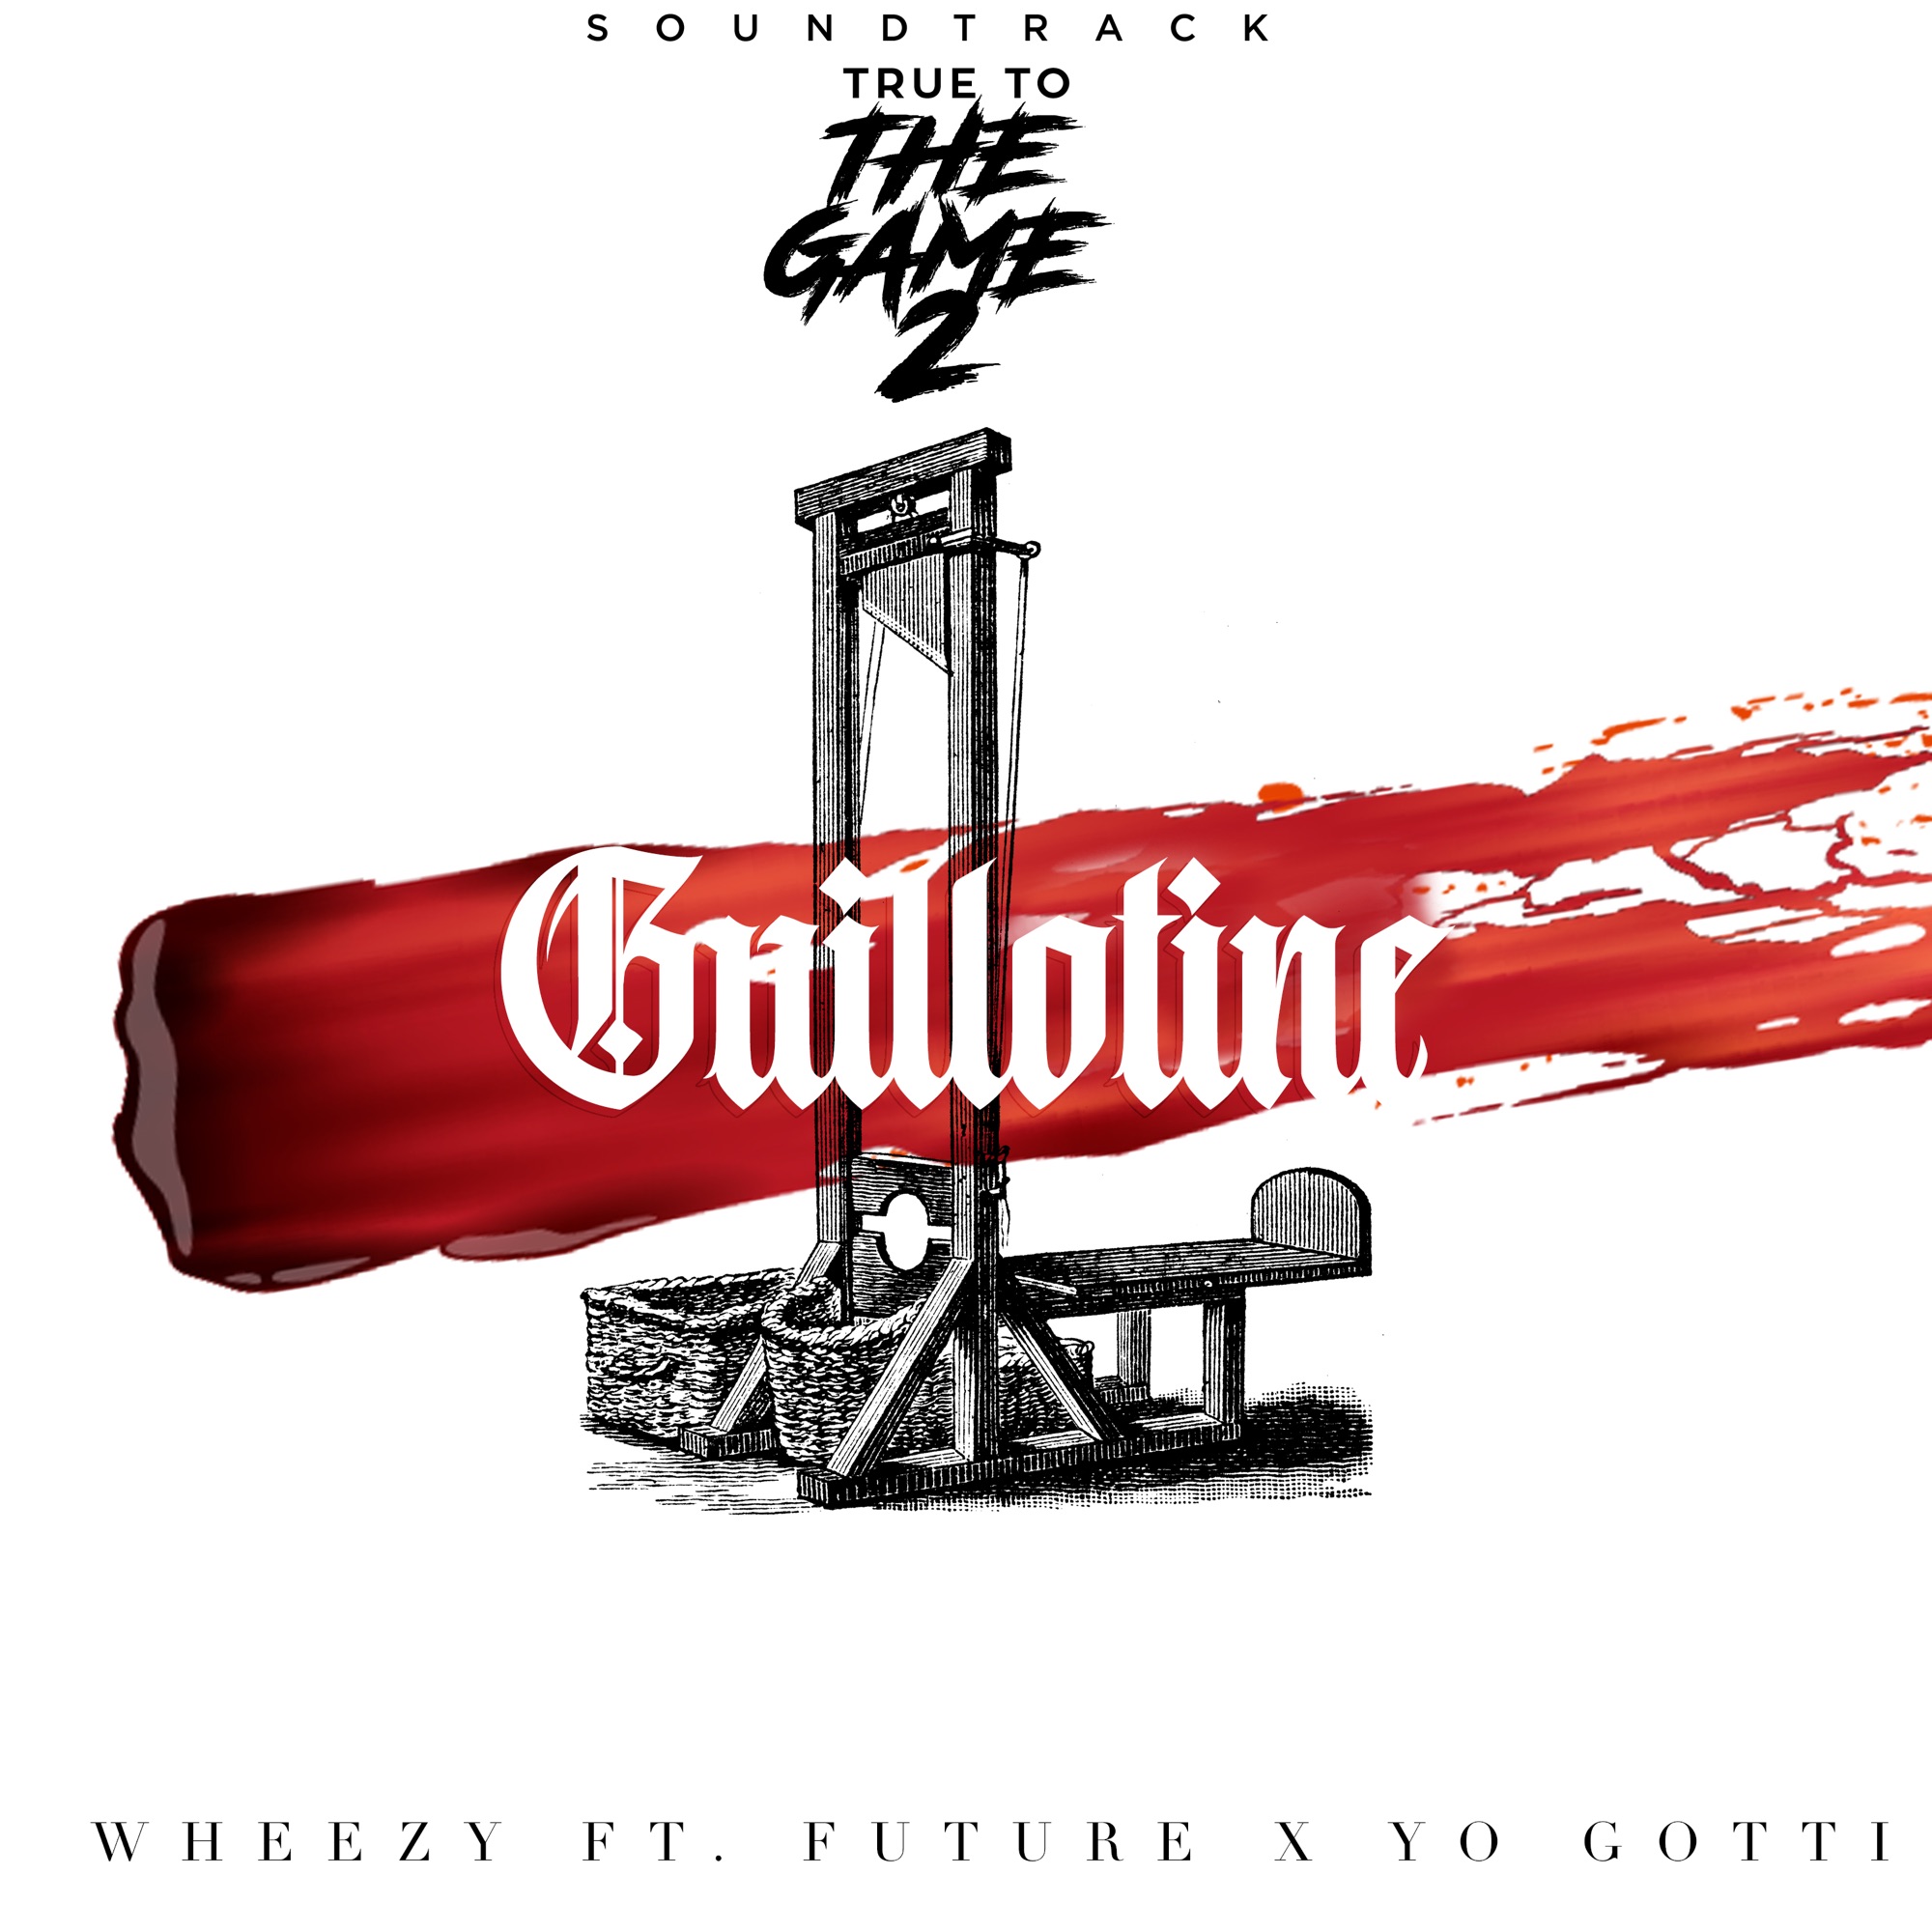 Wheezy - Guillotine (From “True to the Game 2” Original Motion Picture Soundtrack) [feat. Yo Gotti & Future] - Single